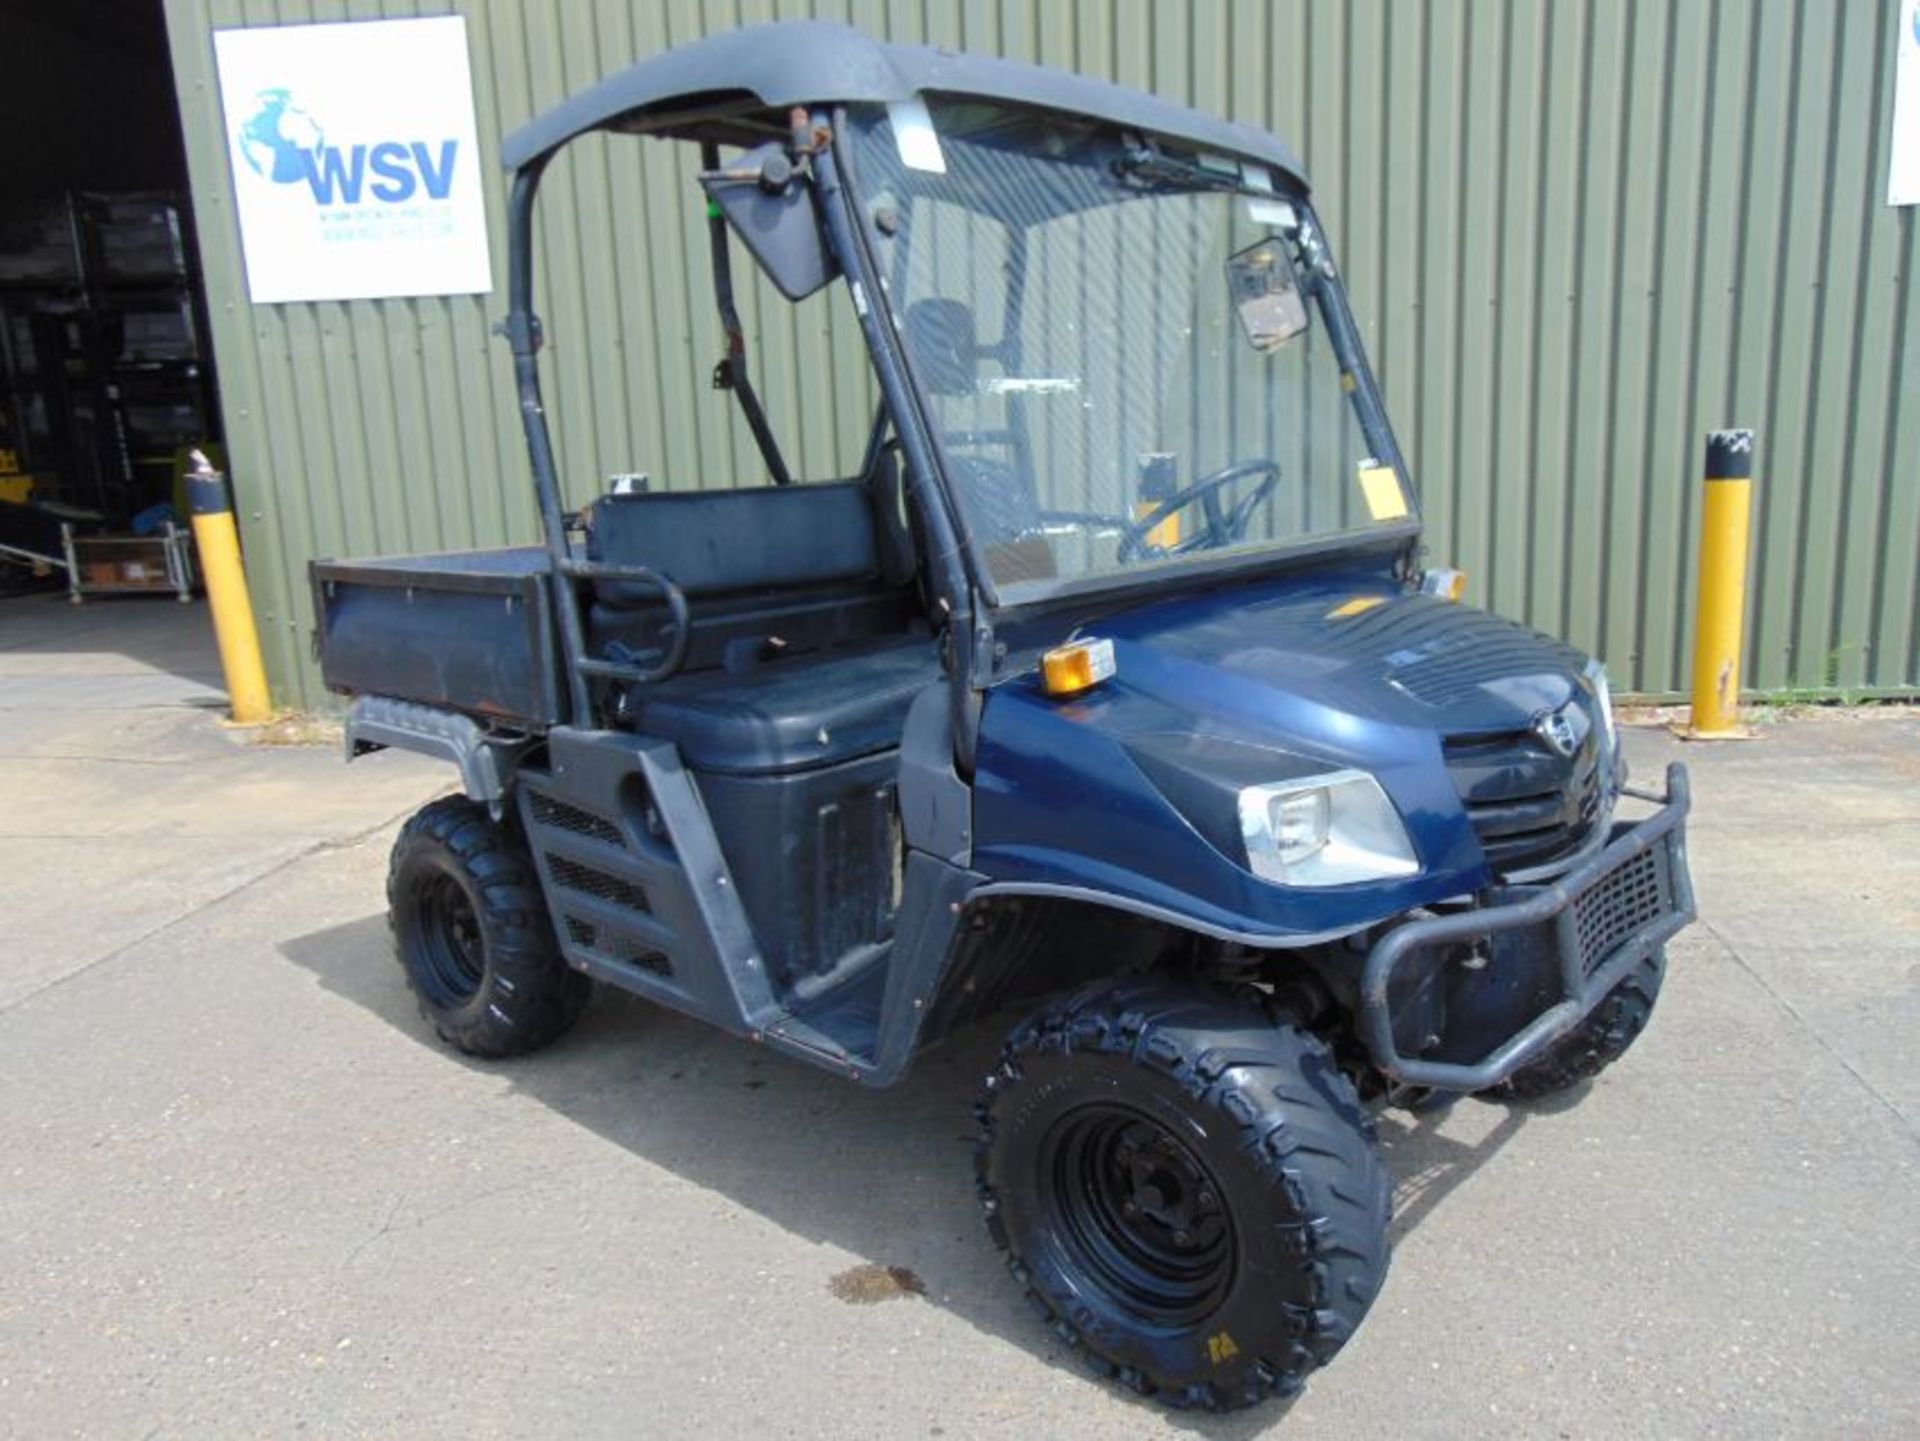 2014 Cushman XD1600 4x4 Diesel Utility Vehicle Showing 1333 hrs - Image 2 of 19